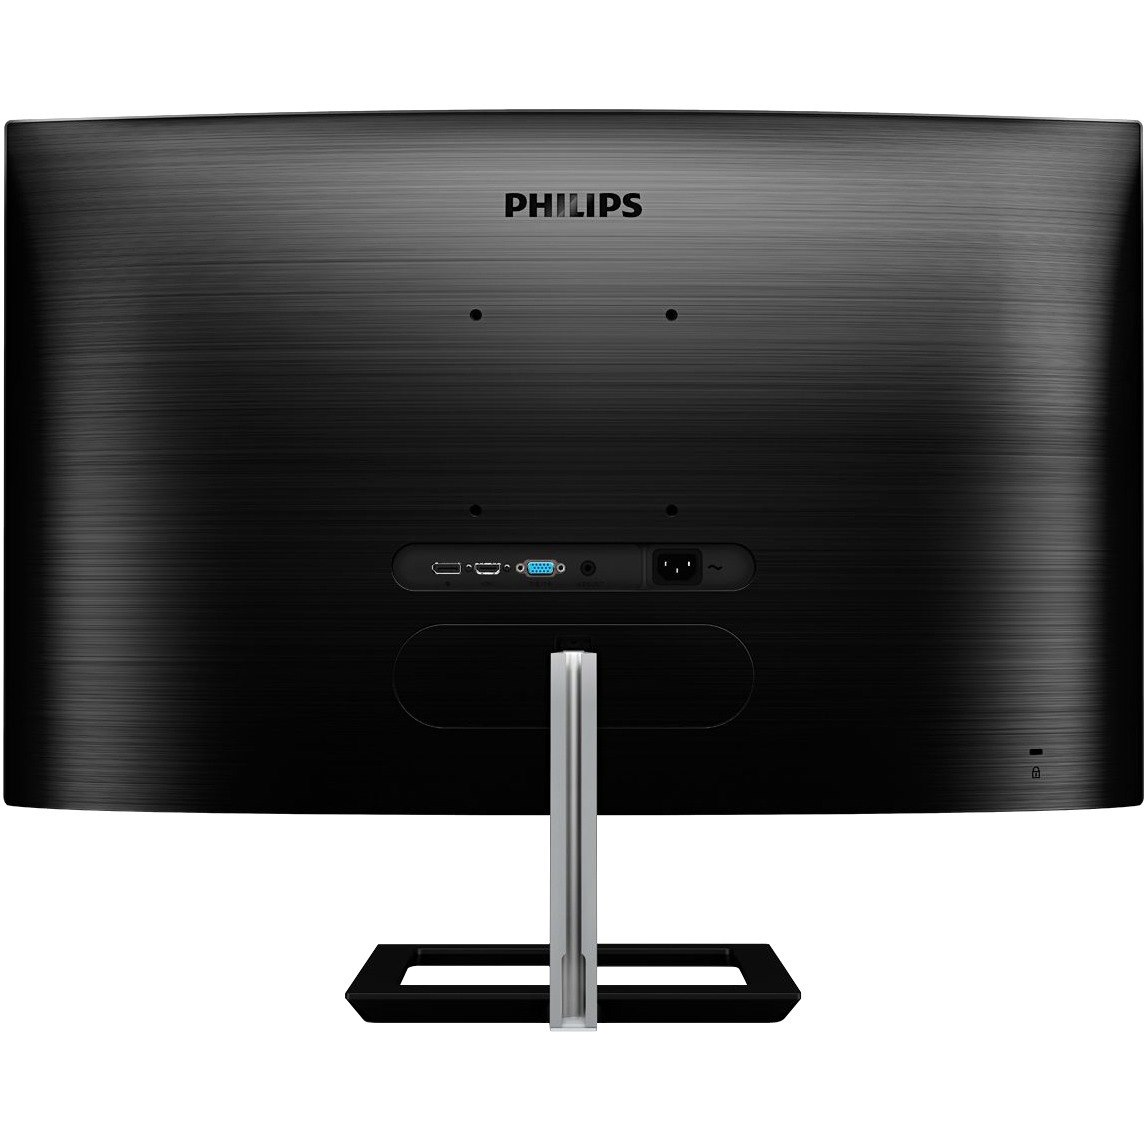 Philips 322E1C 32" Class Full HD Curved Screen Gaming LCD Monitor - 16:9 - Textured Black